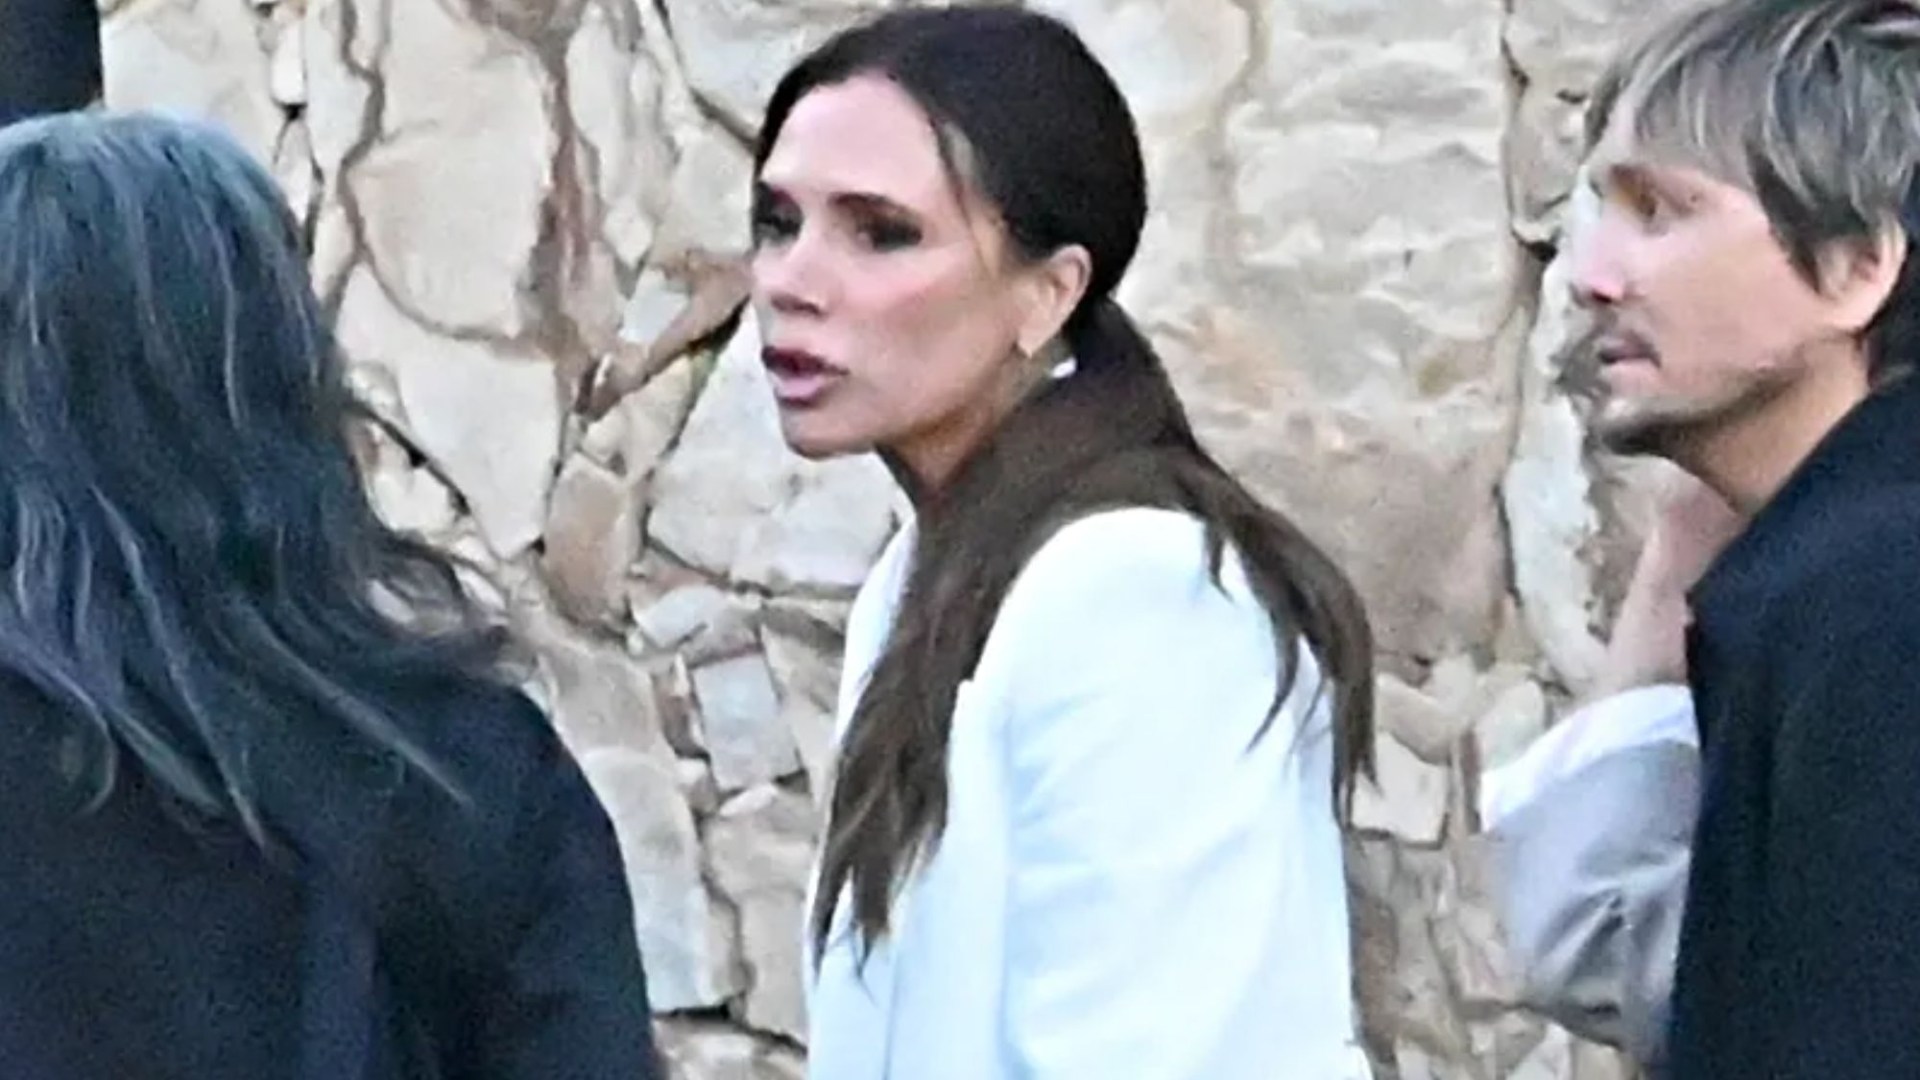 Victoria Beckham joins A-list stars on crutches after 50th birthday bash – exclusive behind-the-scenes footage!